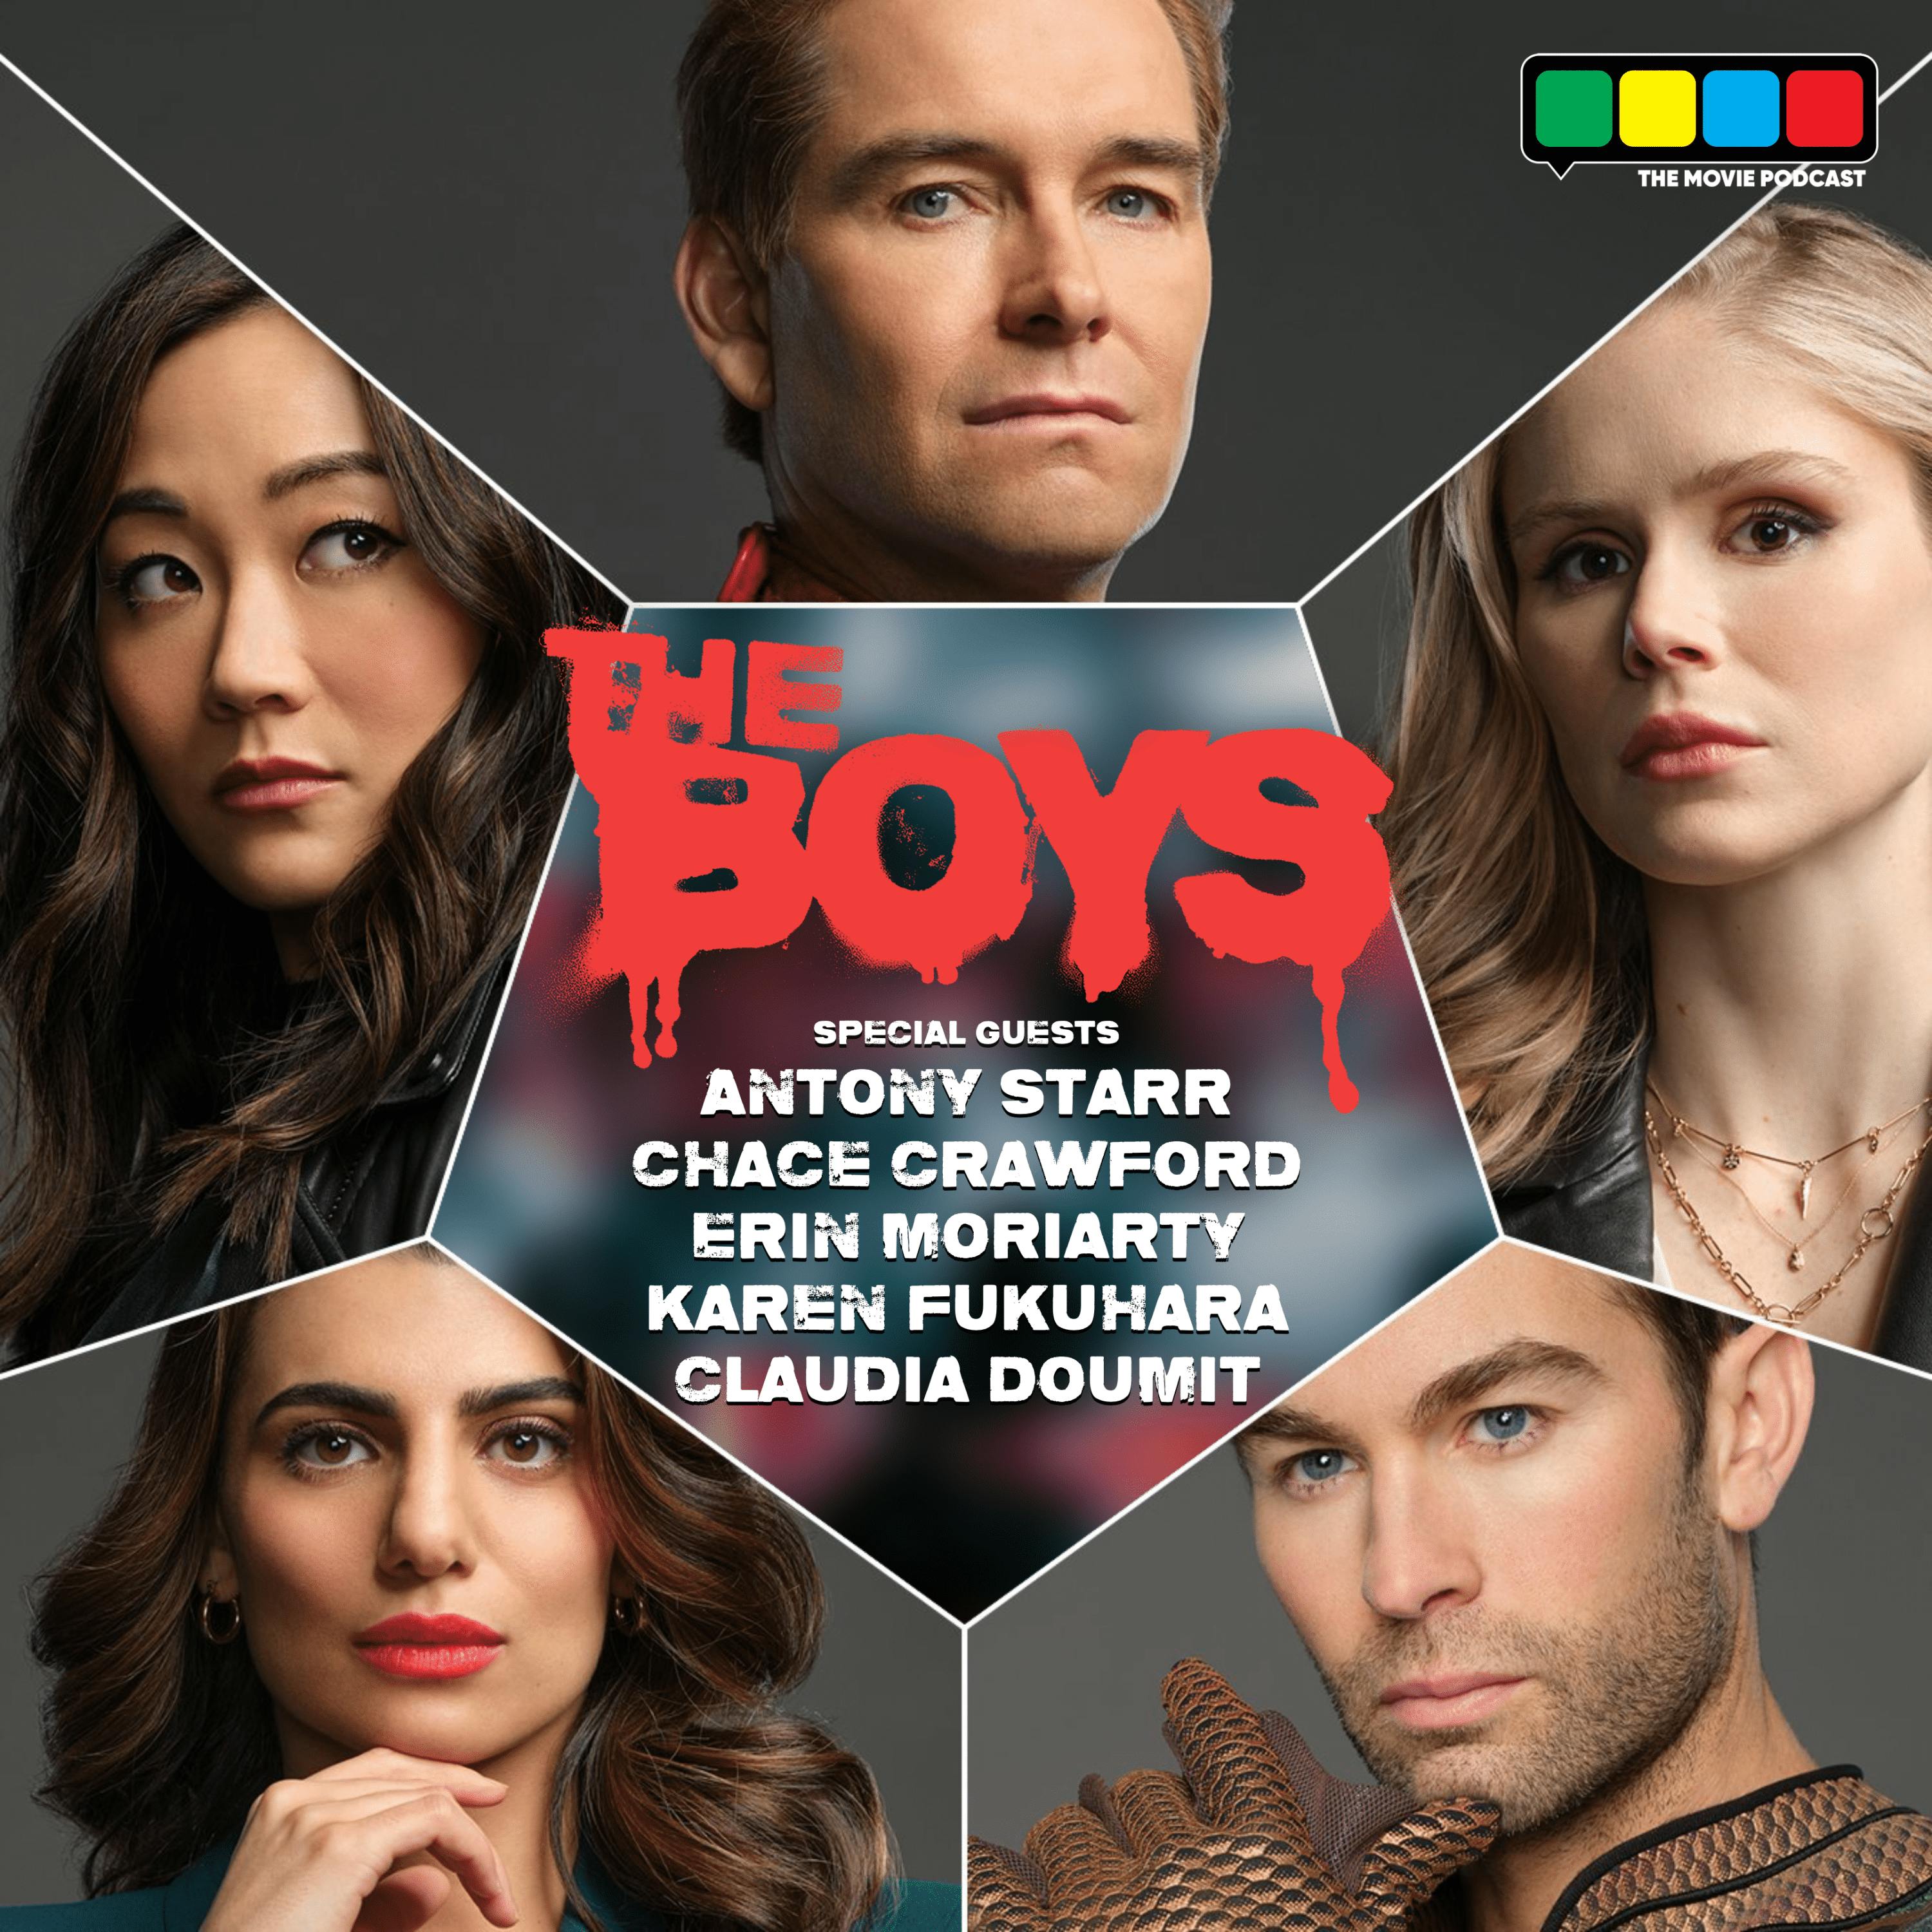 The Boys Interview with Antony Starr, Chace Crawford, Erin Moriarty, Karen Fukuhara, and Claudia Doumit (Season 4, Prime Video)